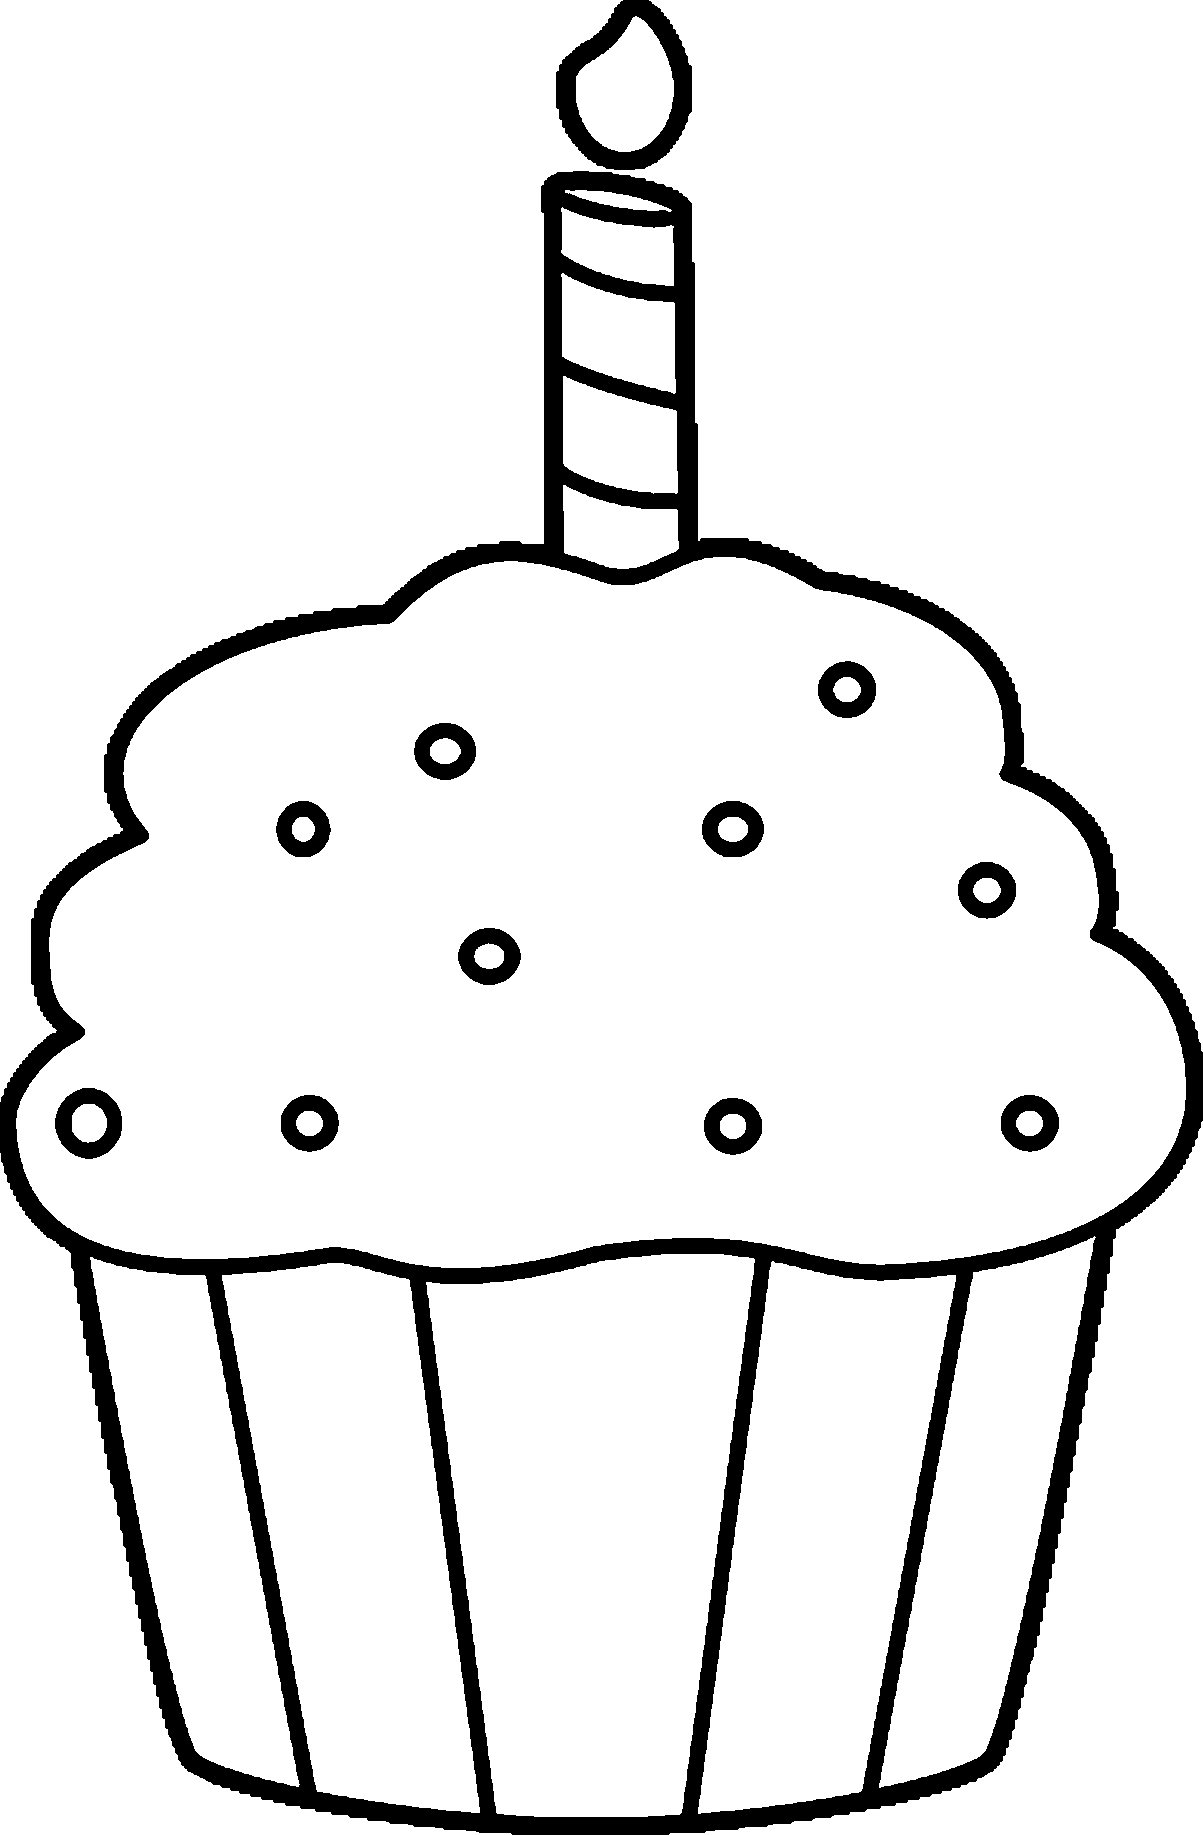 Cupcake Coloring Pages Free - Coloring Home